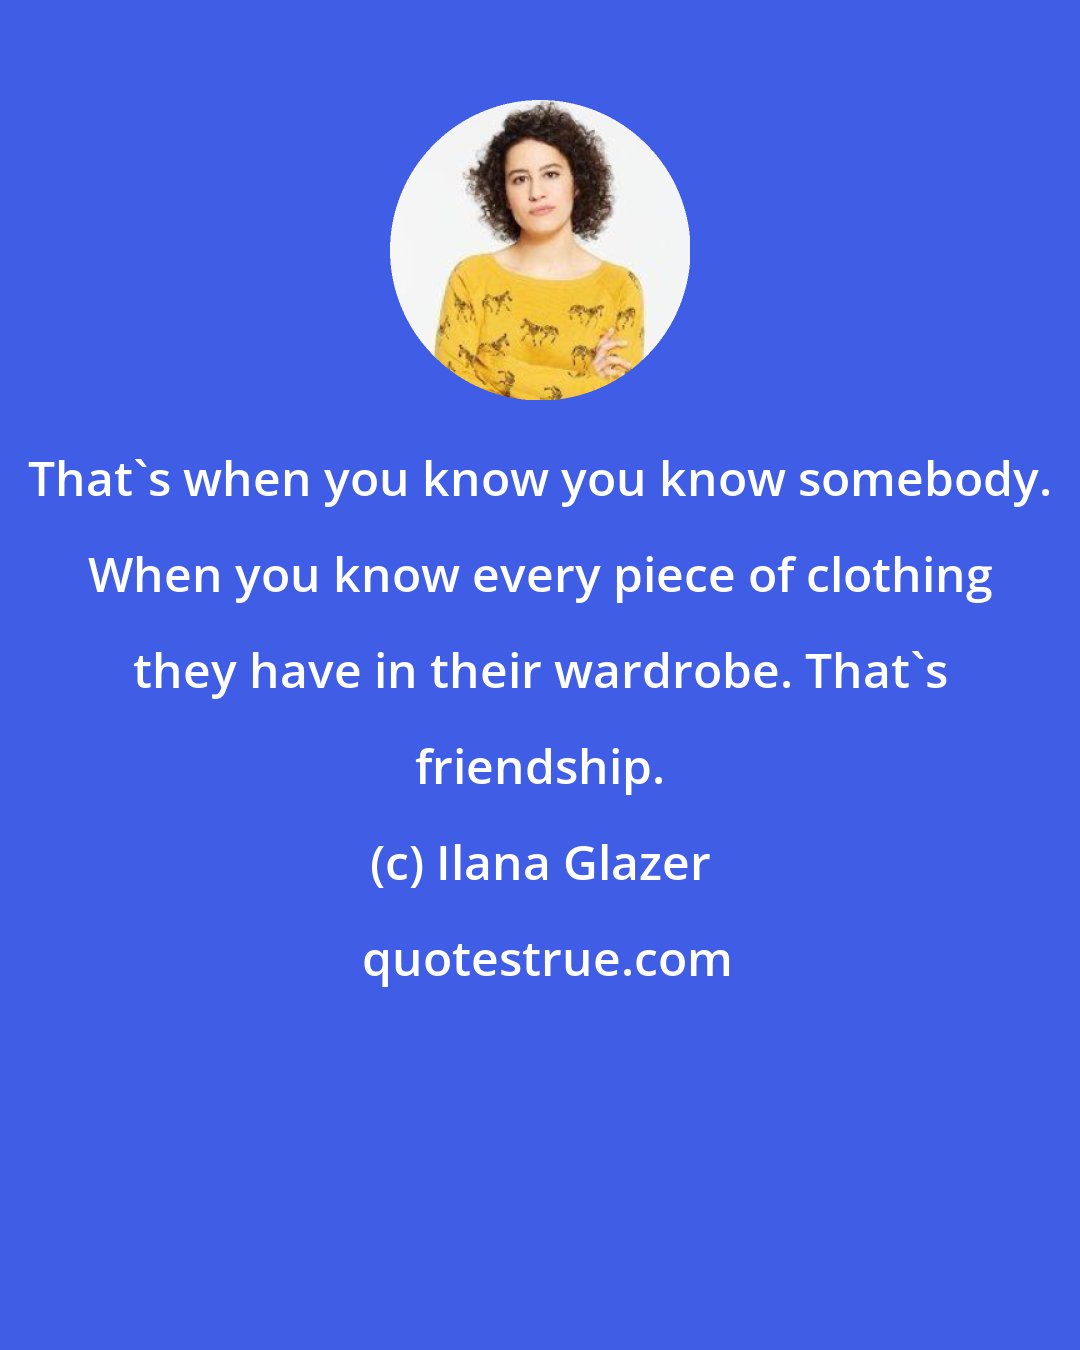 Ilana Glazer: That's when you know you know somebody. When you know every piece of clothing they have in their wardrobe. That's friendship.